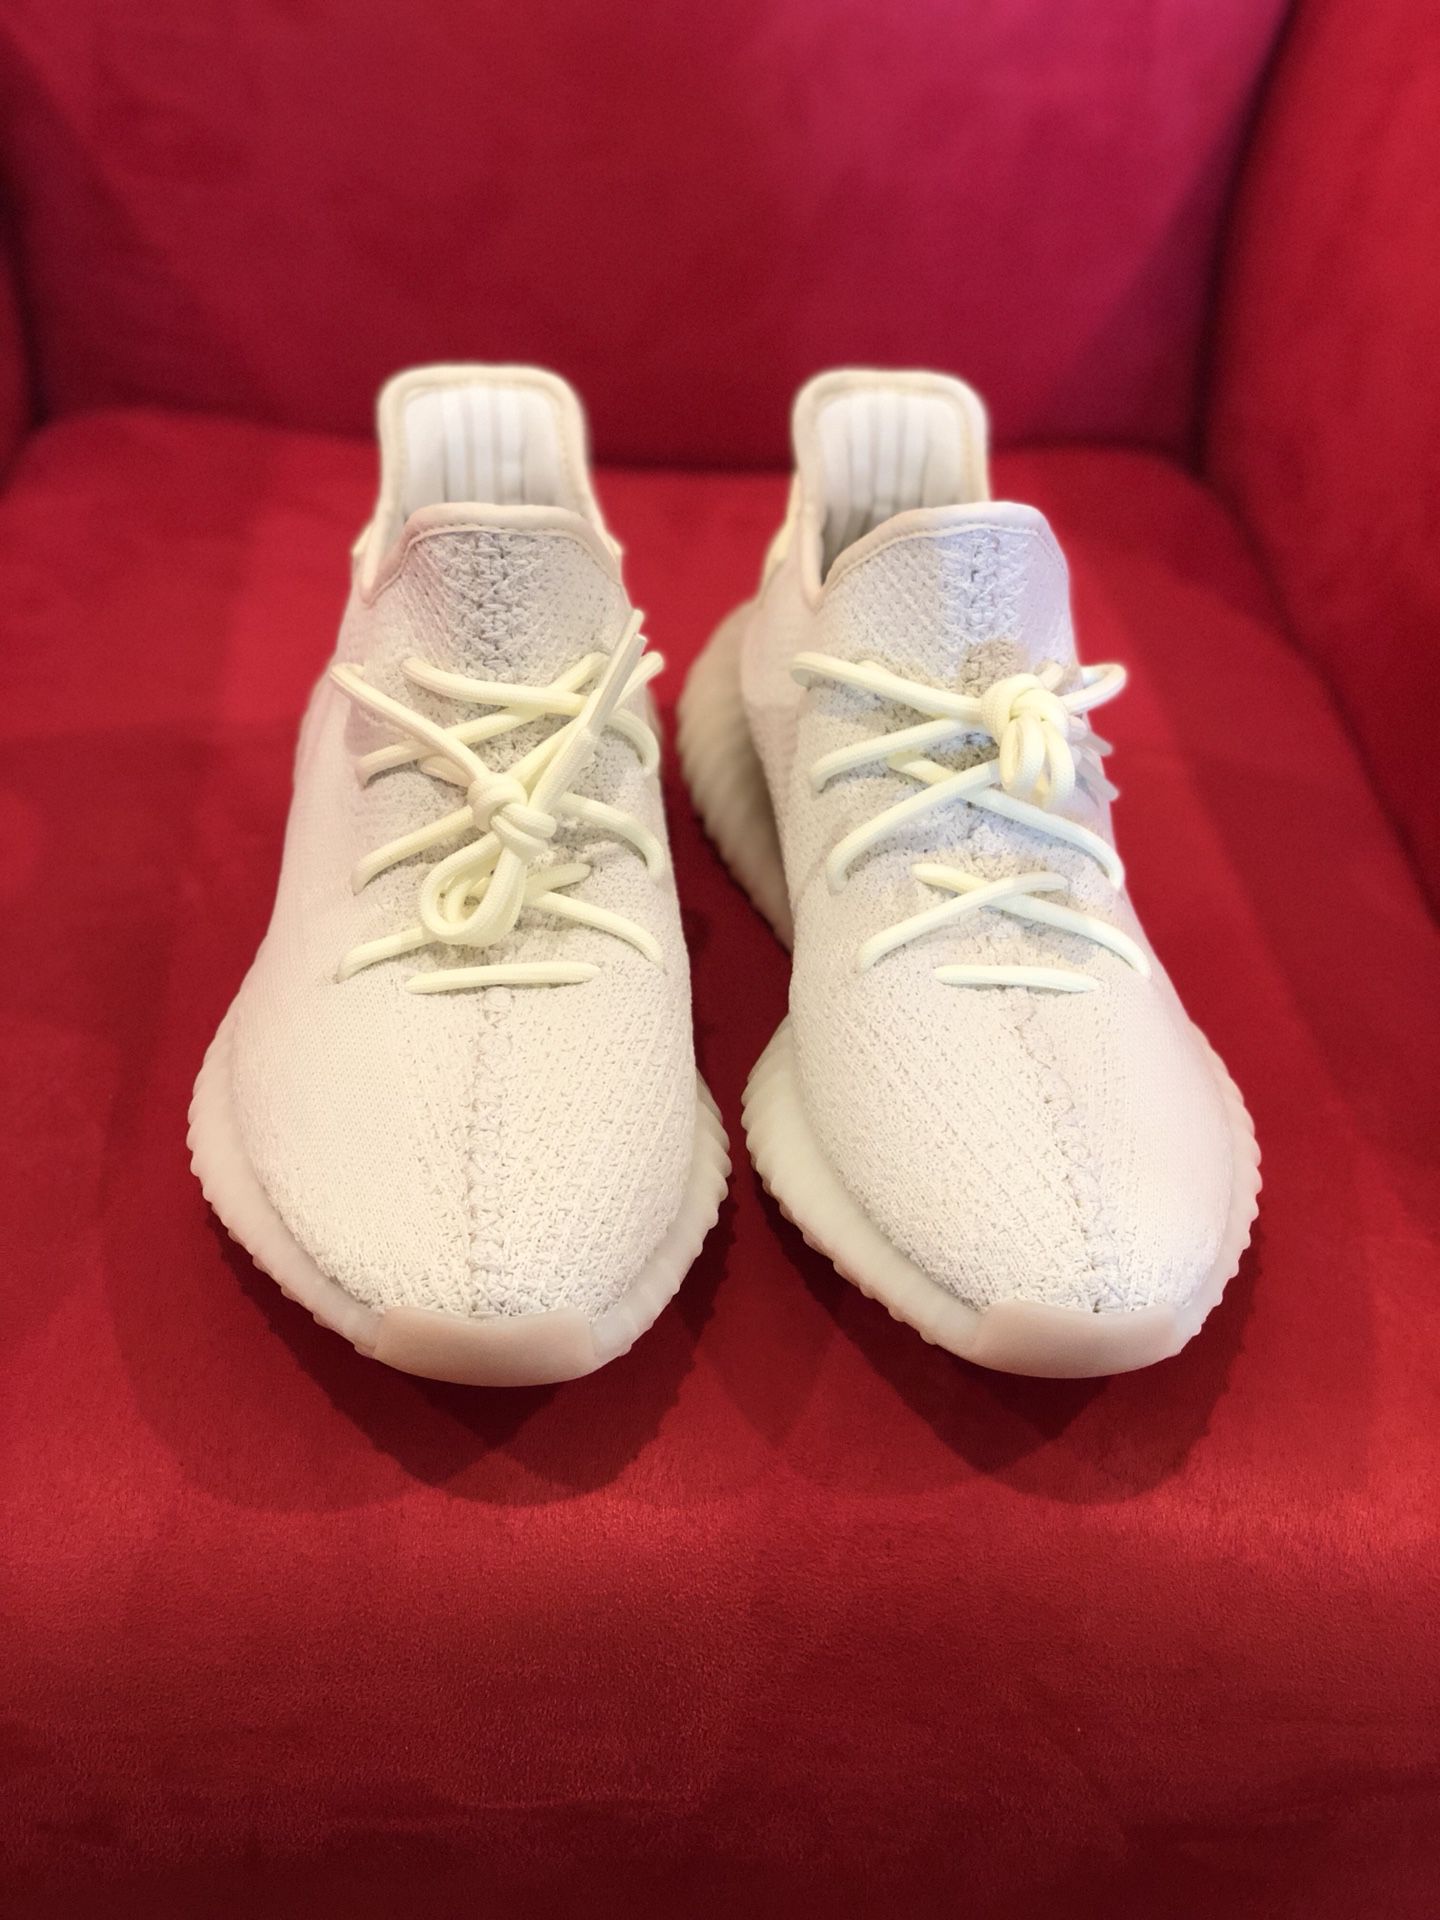 Yeezy 350 v2 ‘butters’ size 5